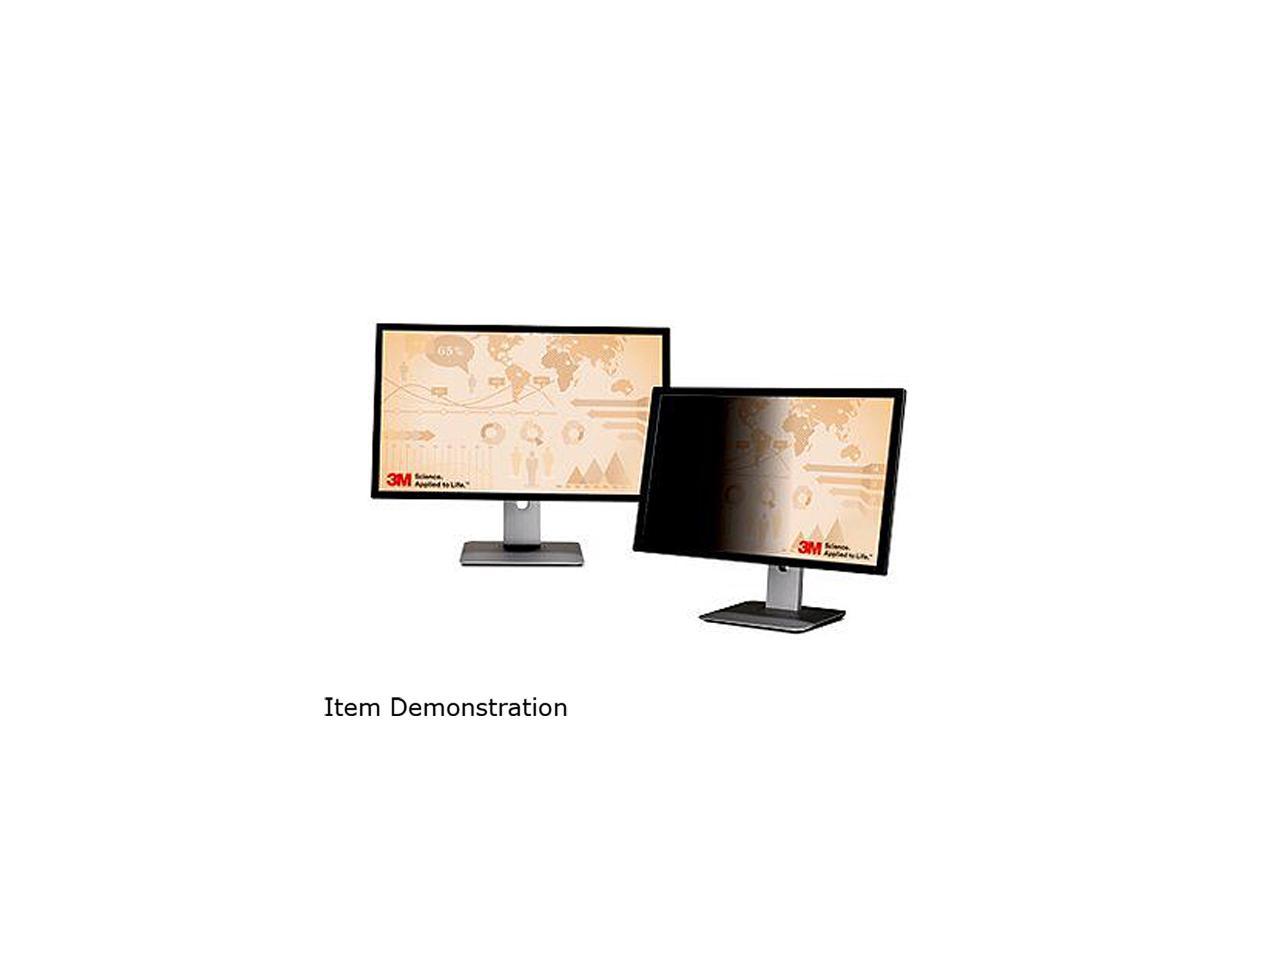 3M PF280W1B Privacy Filter for 28" Widescreen Monitor 16:10 Ratio